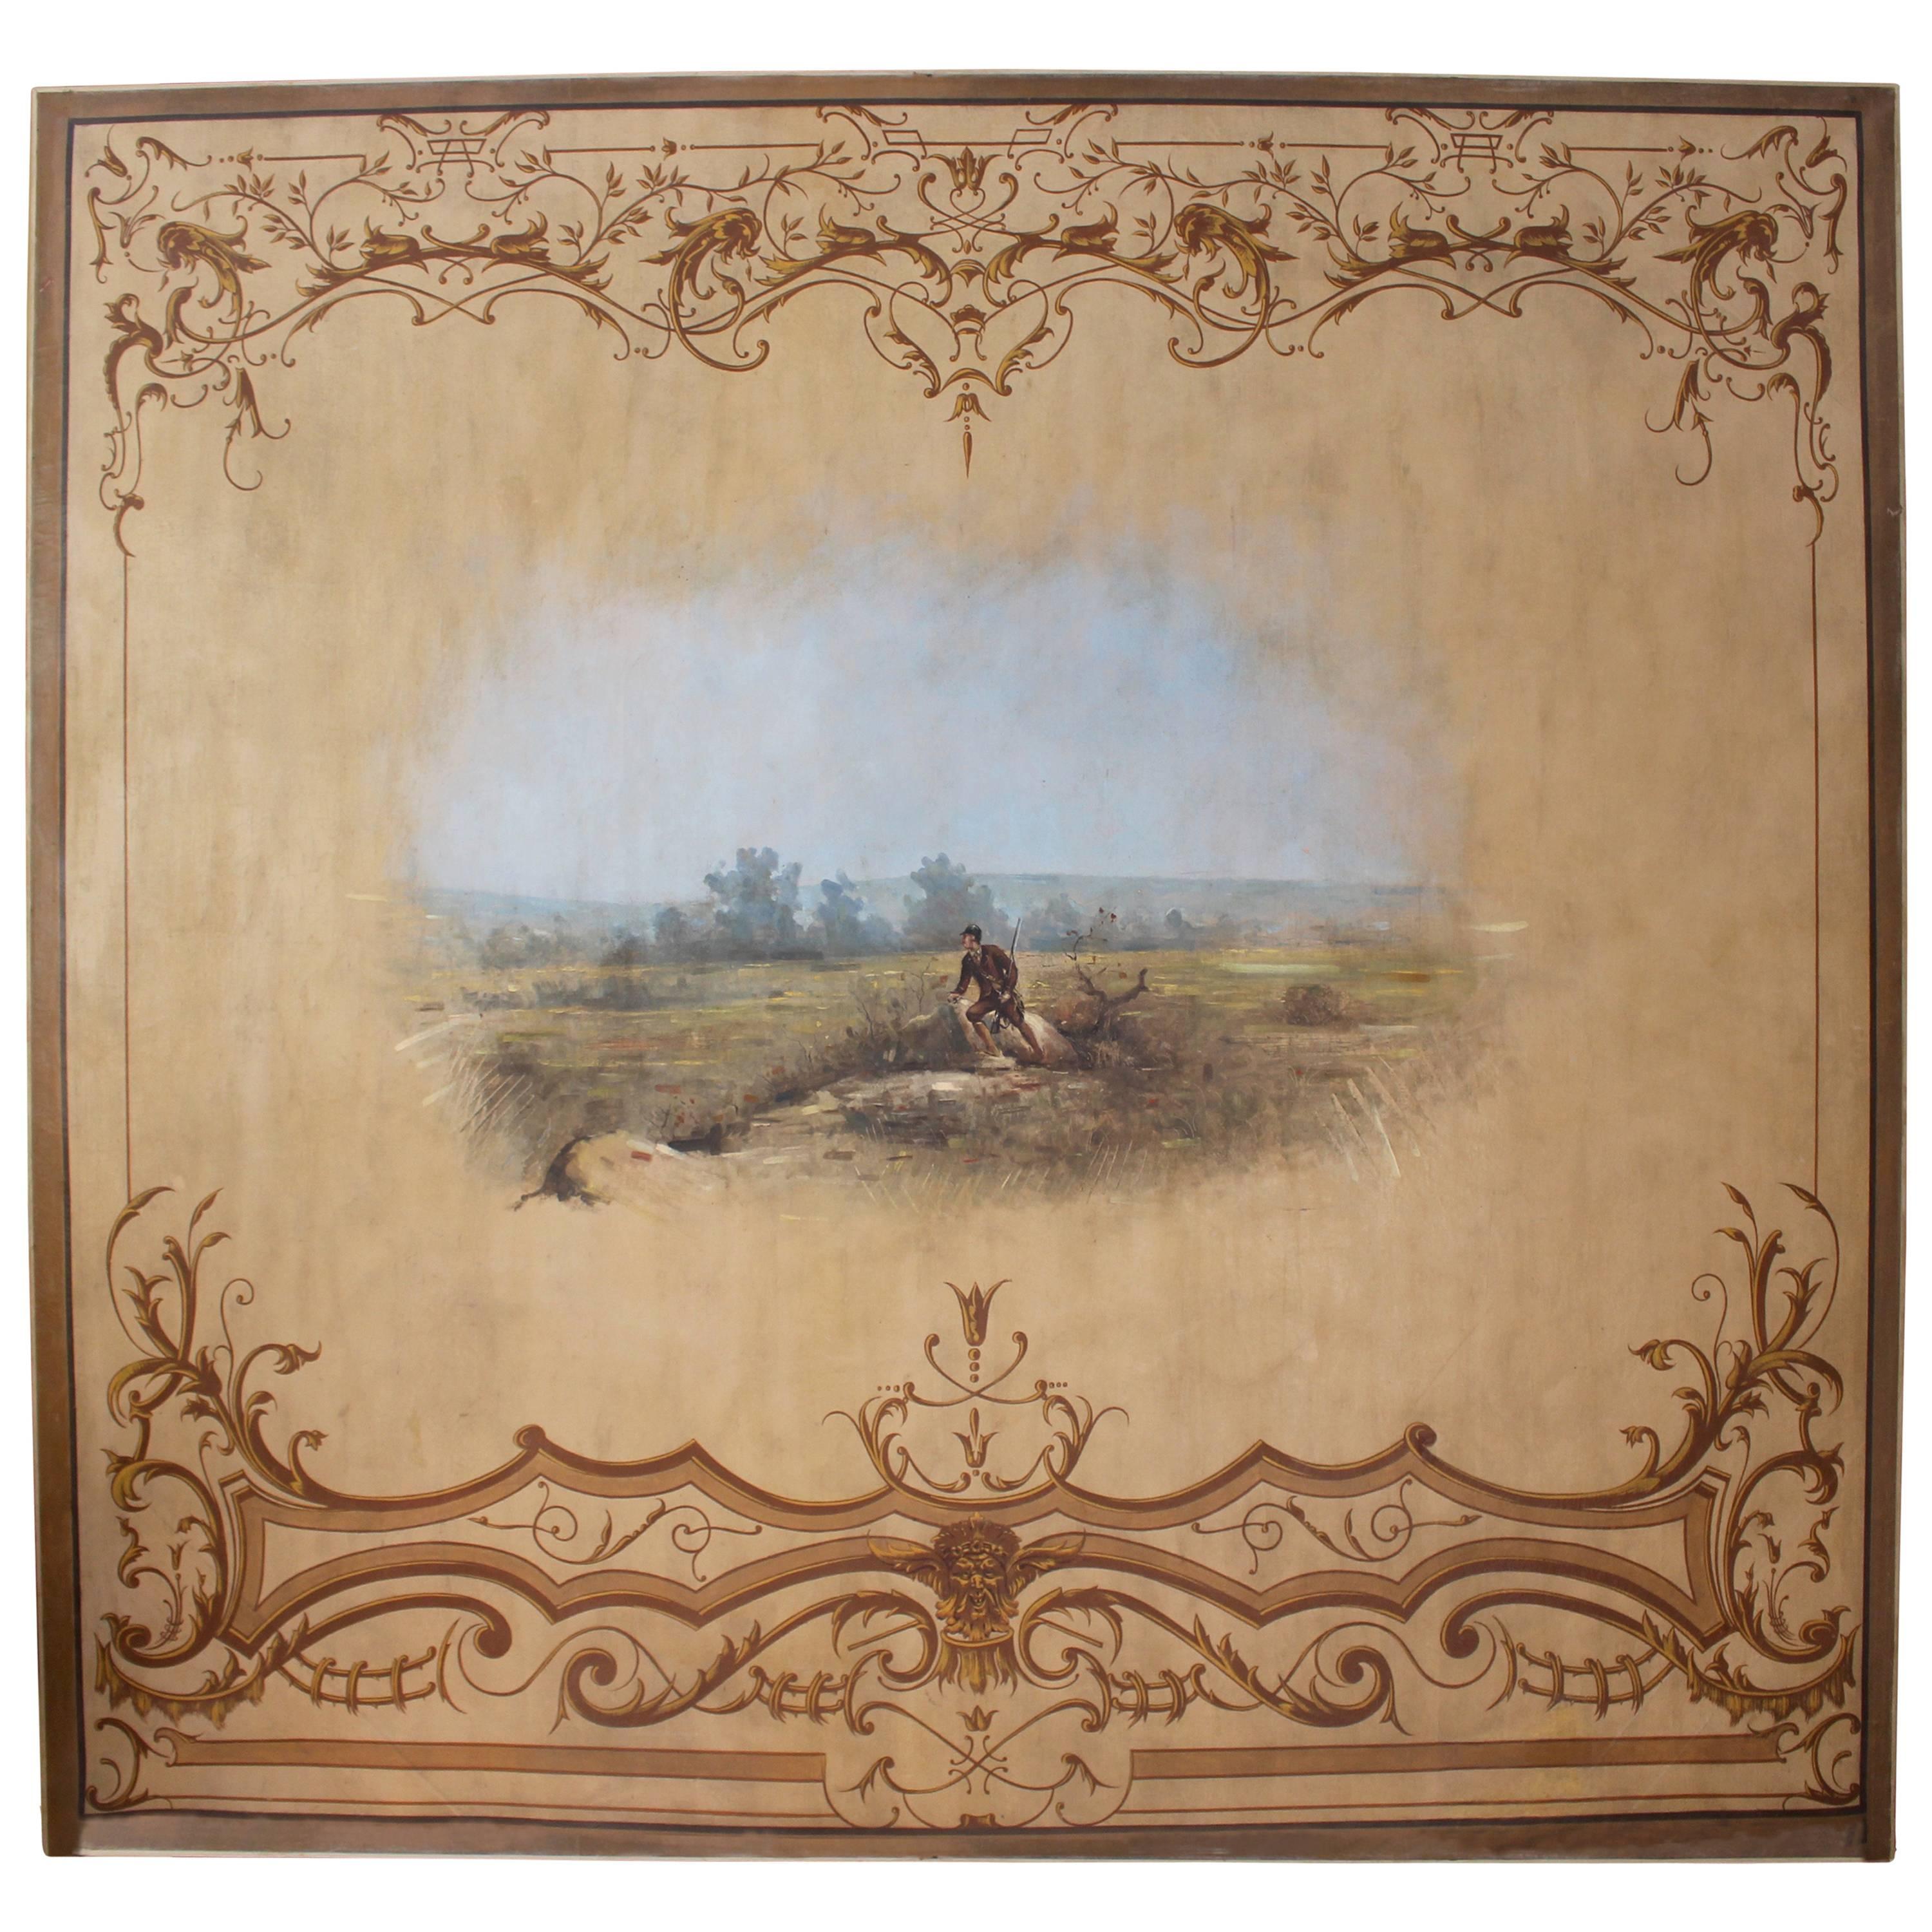 Large French Painted Panel with a Countryside Scene Framed by Arabesque Designs